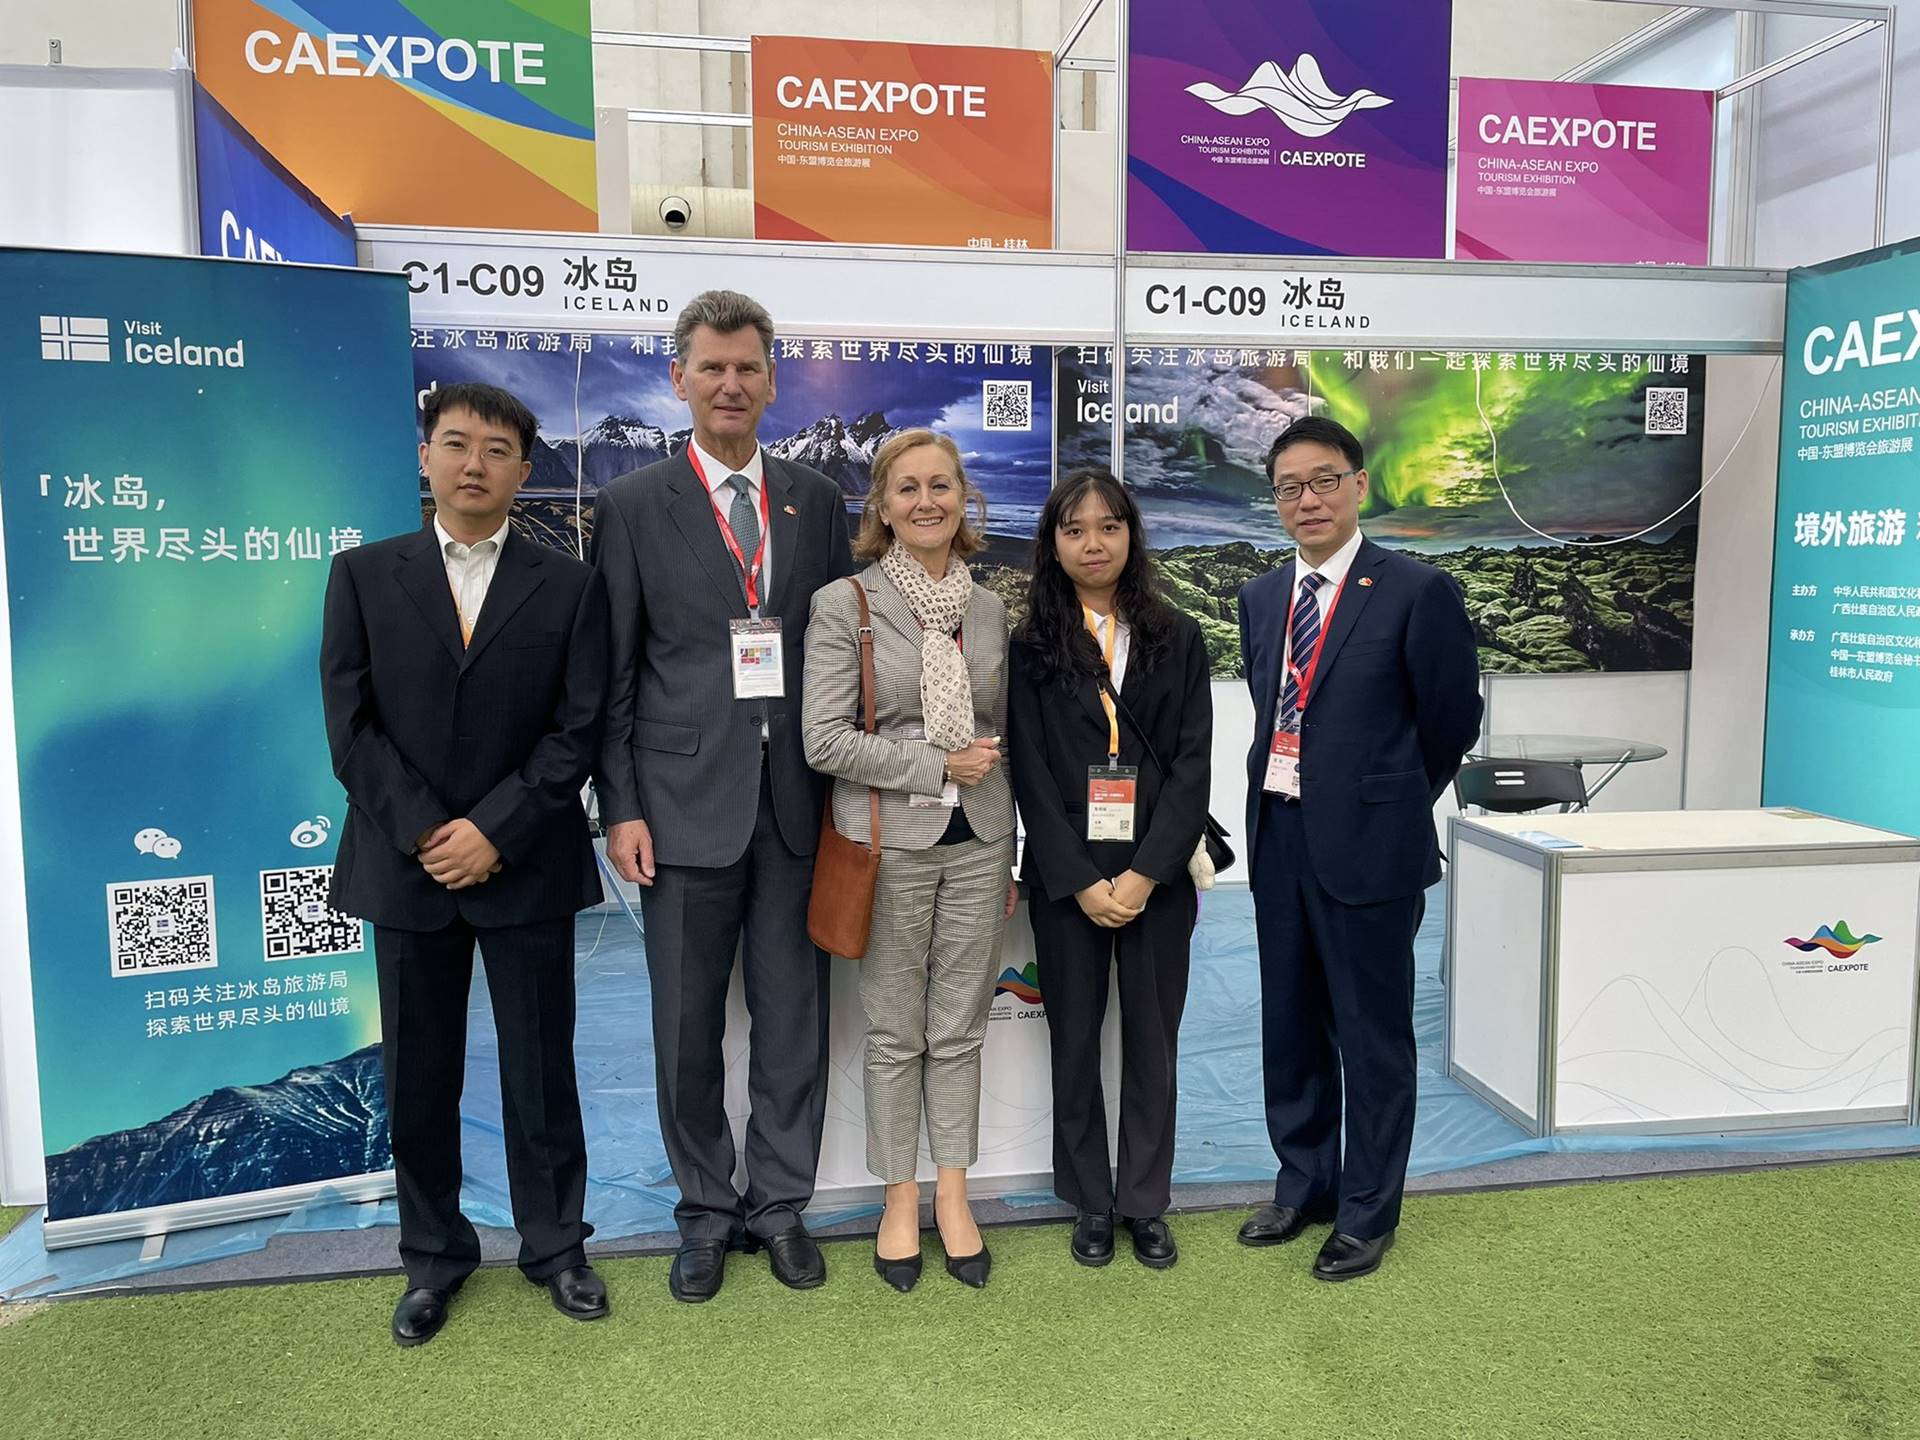 The Embassy of Iceland and Visit Iceland participate in the China-ASEAN Tourism Exhibition in Guilin - mynd